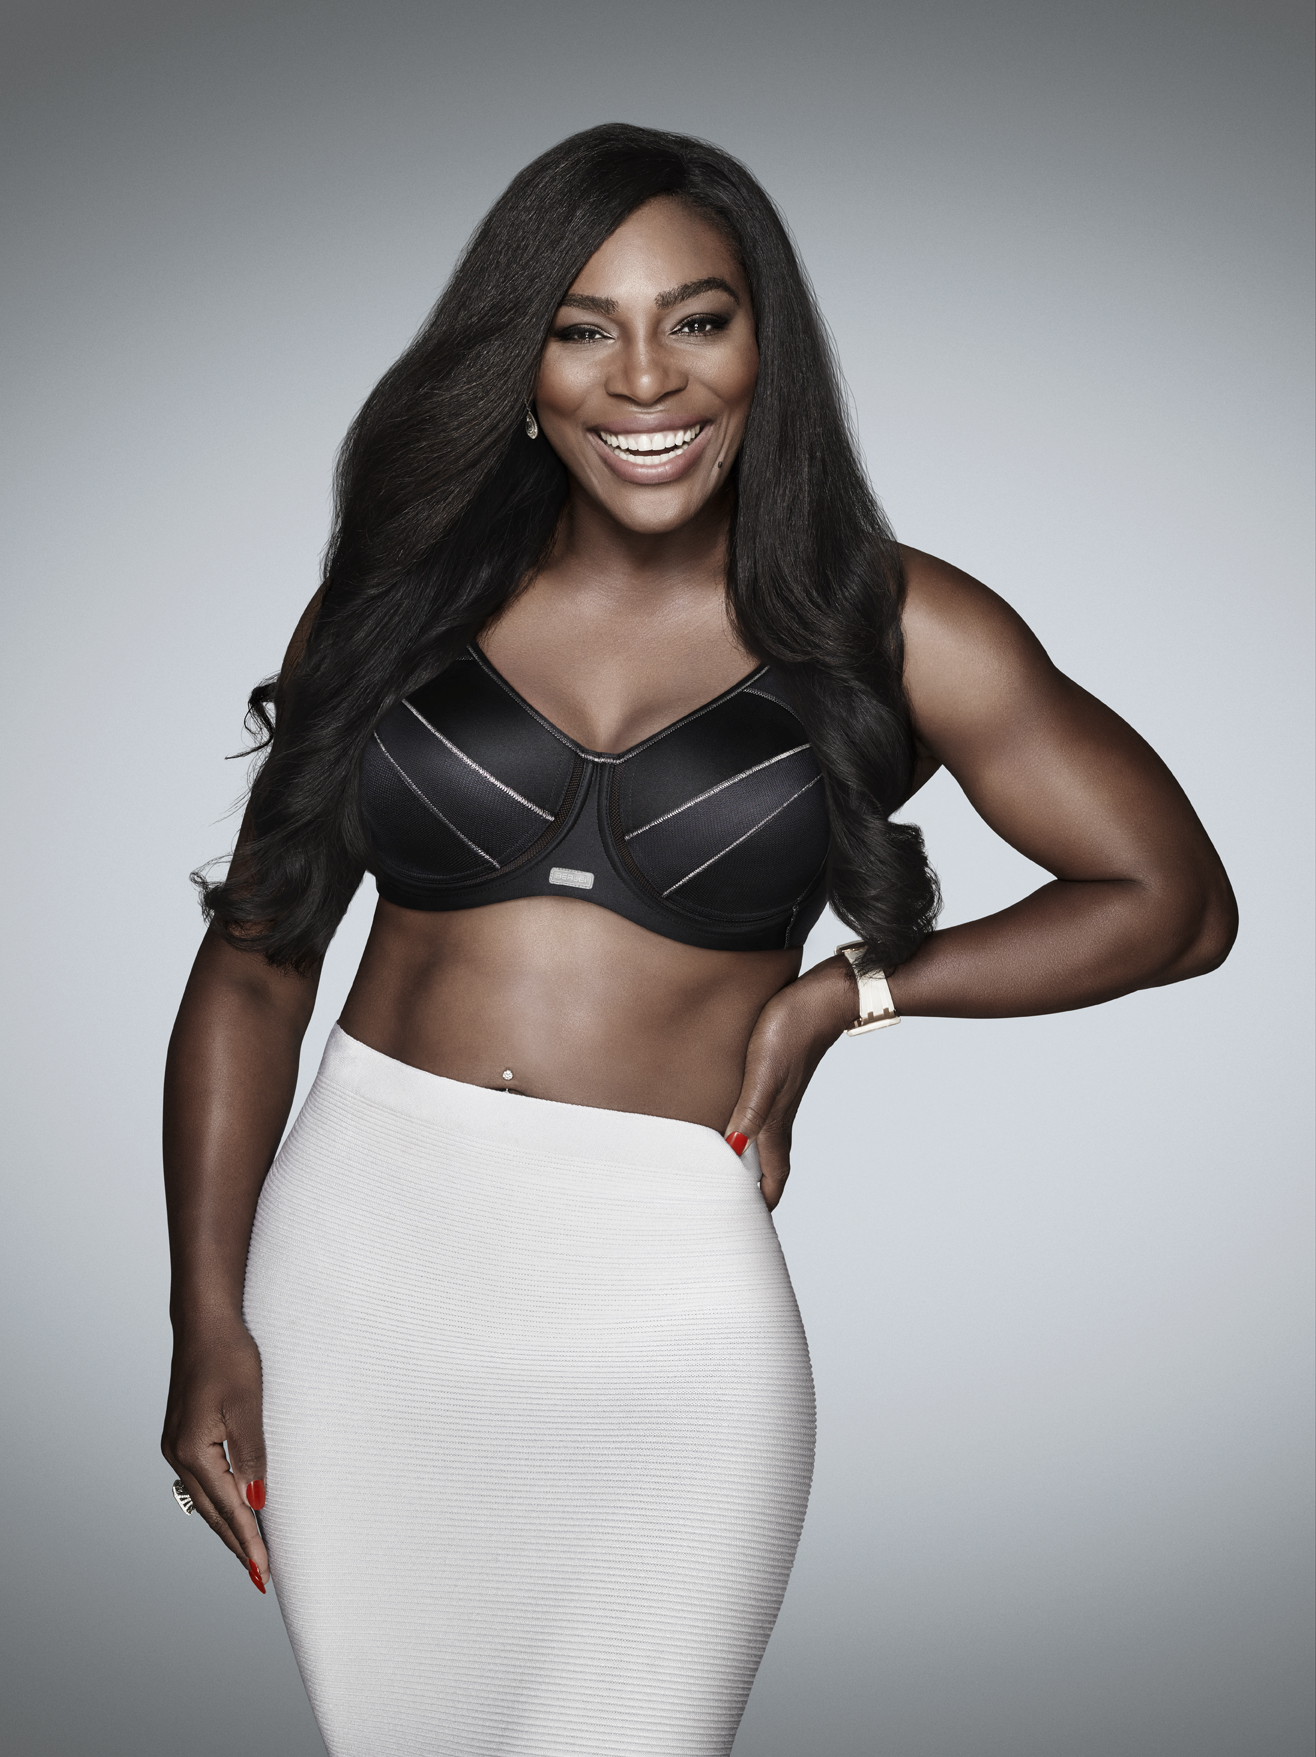 Serena Williams At In-Store Appearance For Berlei Sports Bras U.S. Launch  With Brand Ambassador Serena Williams, Macy'S Herald Square Department  Store, New York, Ny August 25, 2016. Photo By Kristin : 